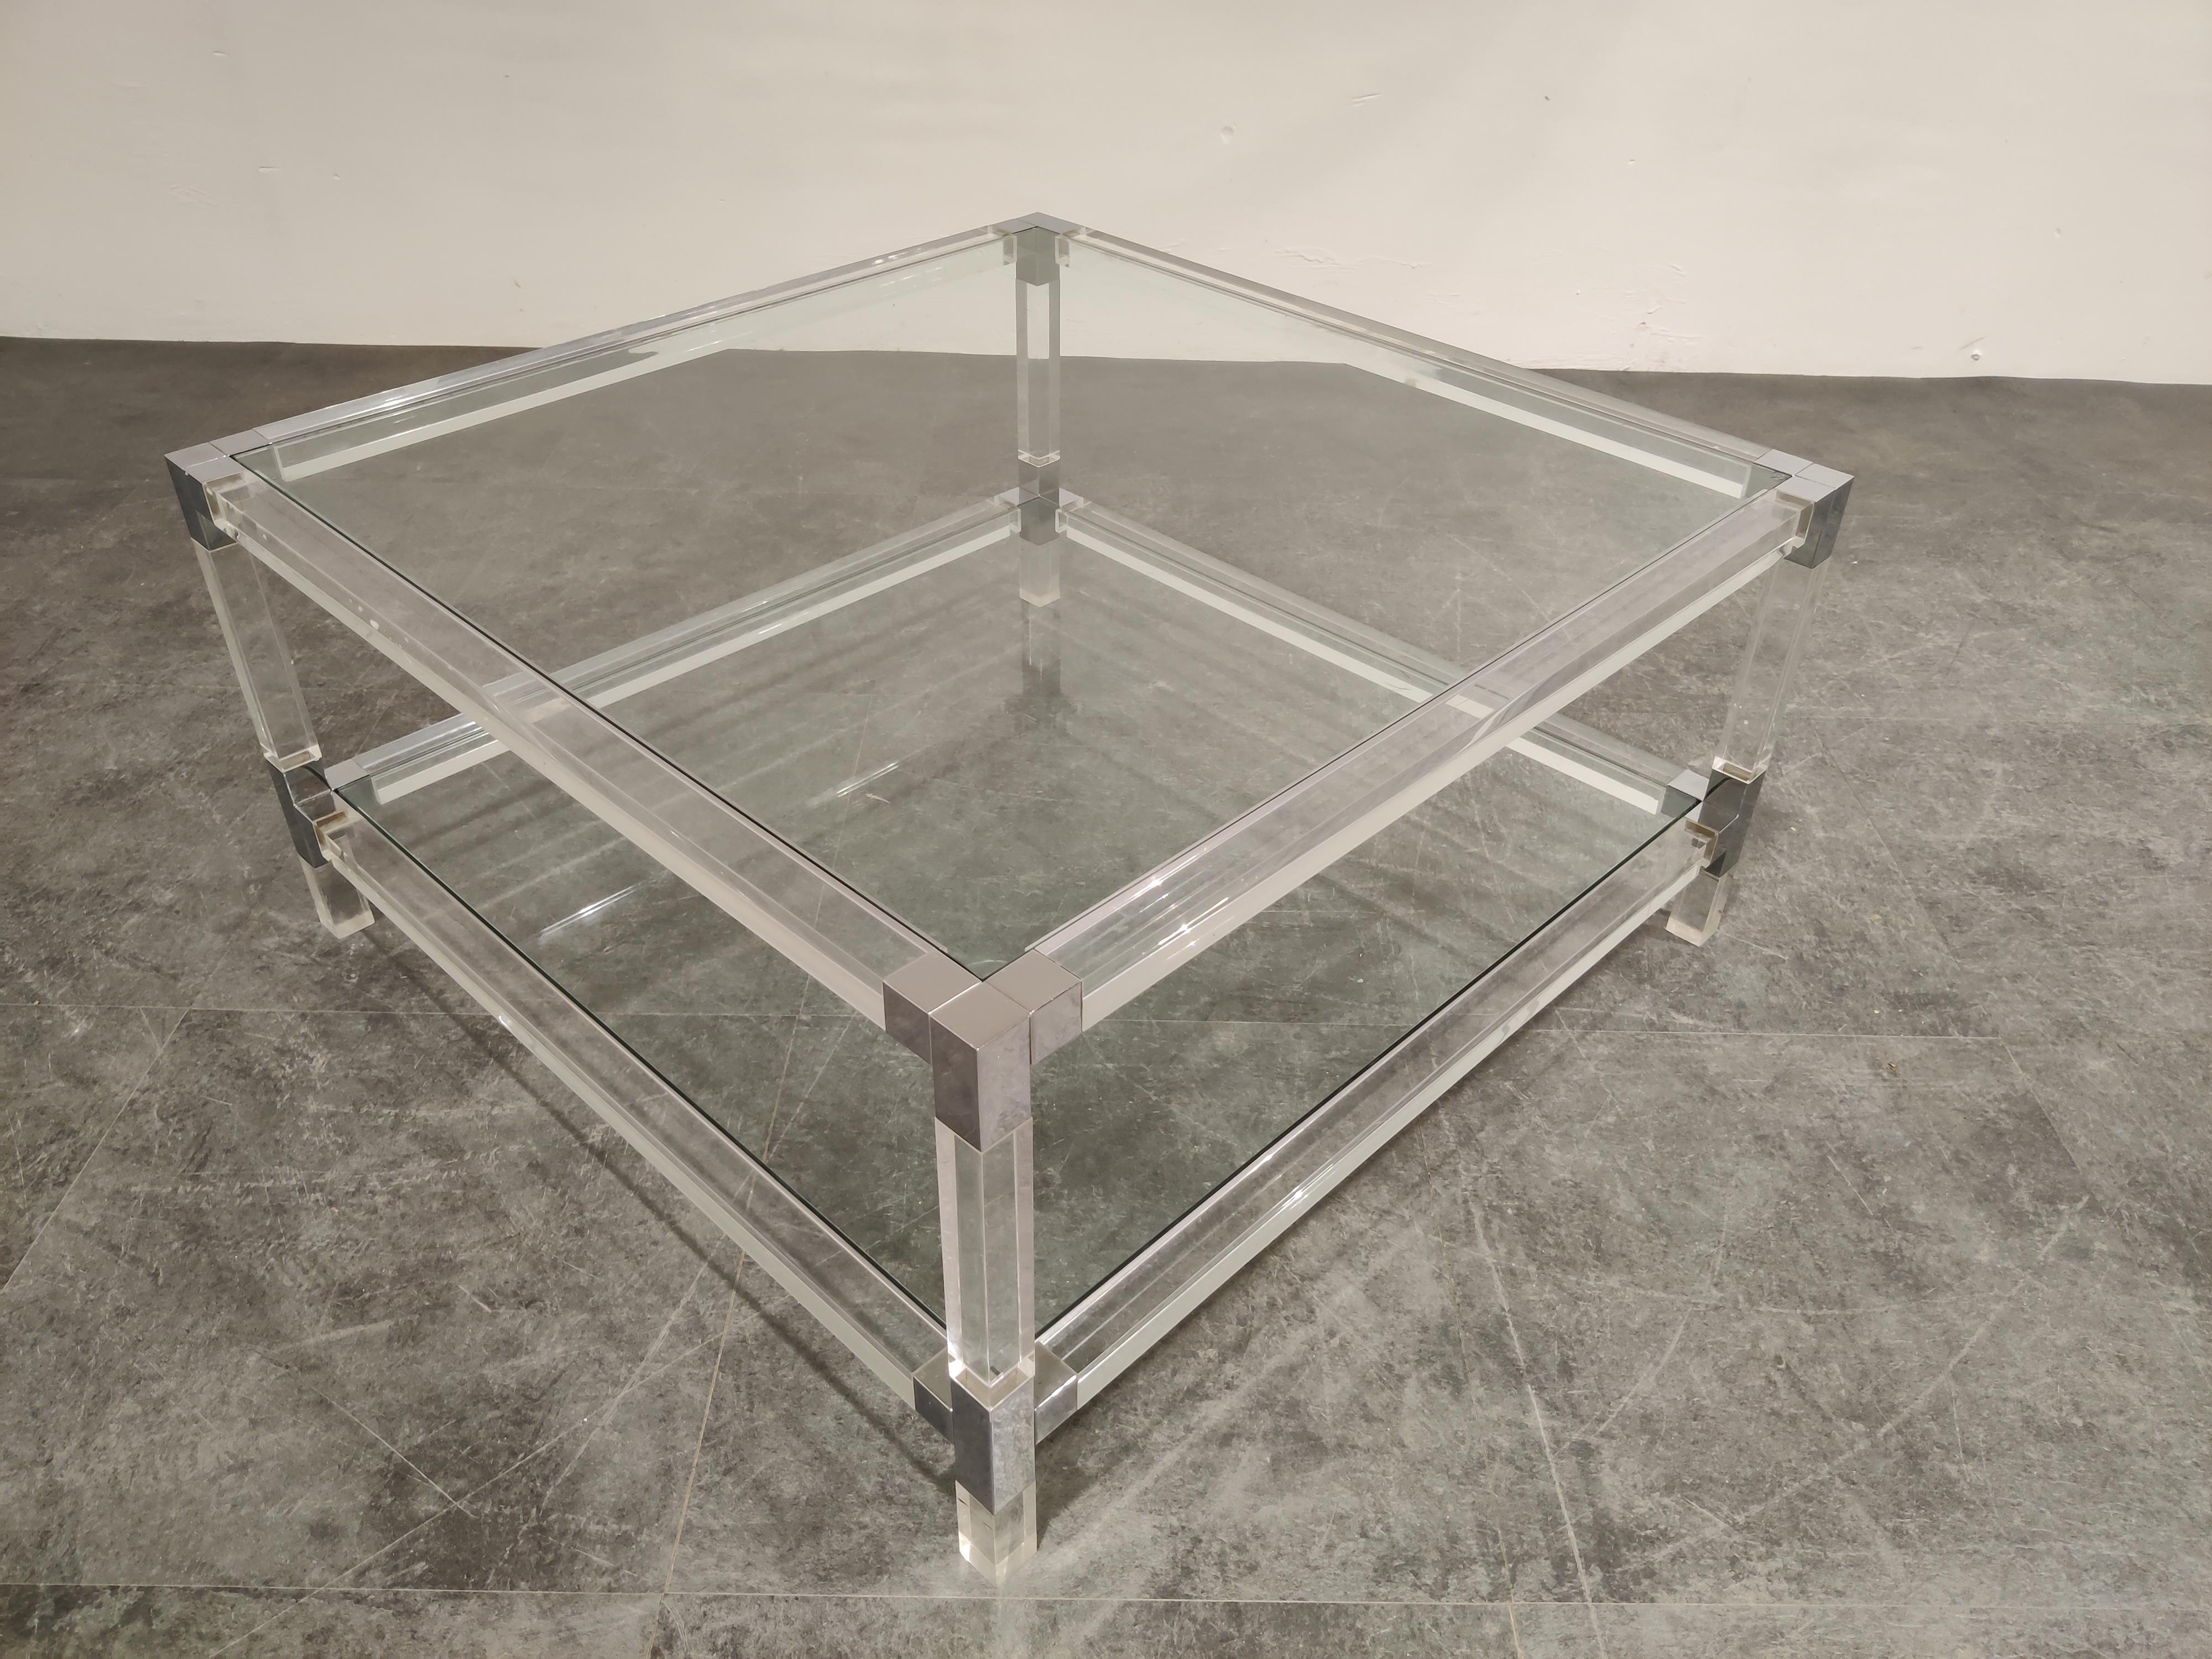 Square coffee table with a Lucite frame, chromed metal corners and clear glass plates in the style of Charles Hollis Jones

Good condition.

Very modern looking and decorative table that can be combined with lots of interior styles.

Good